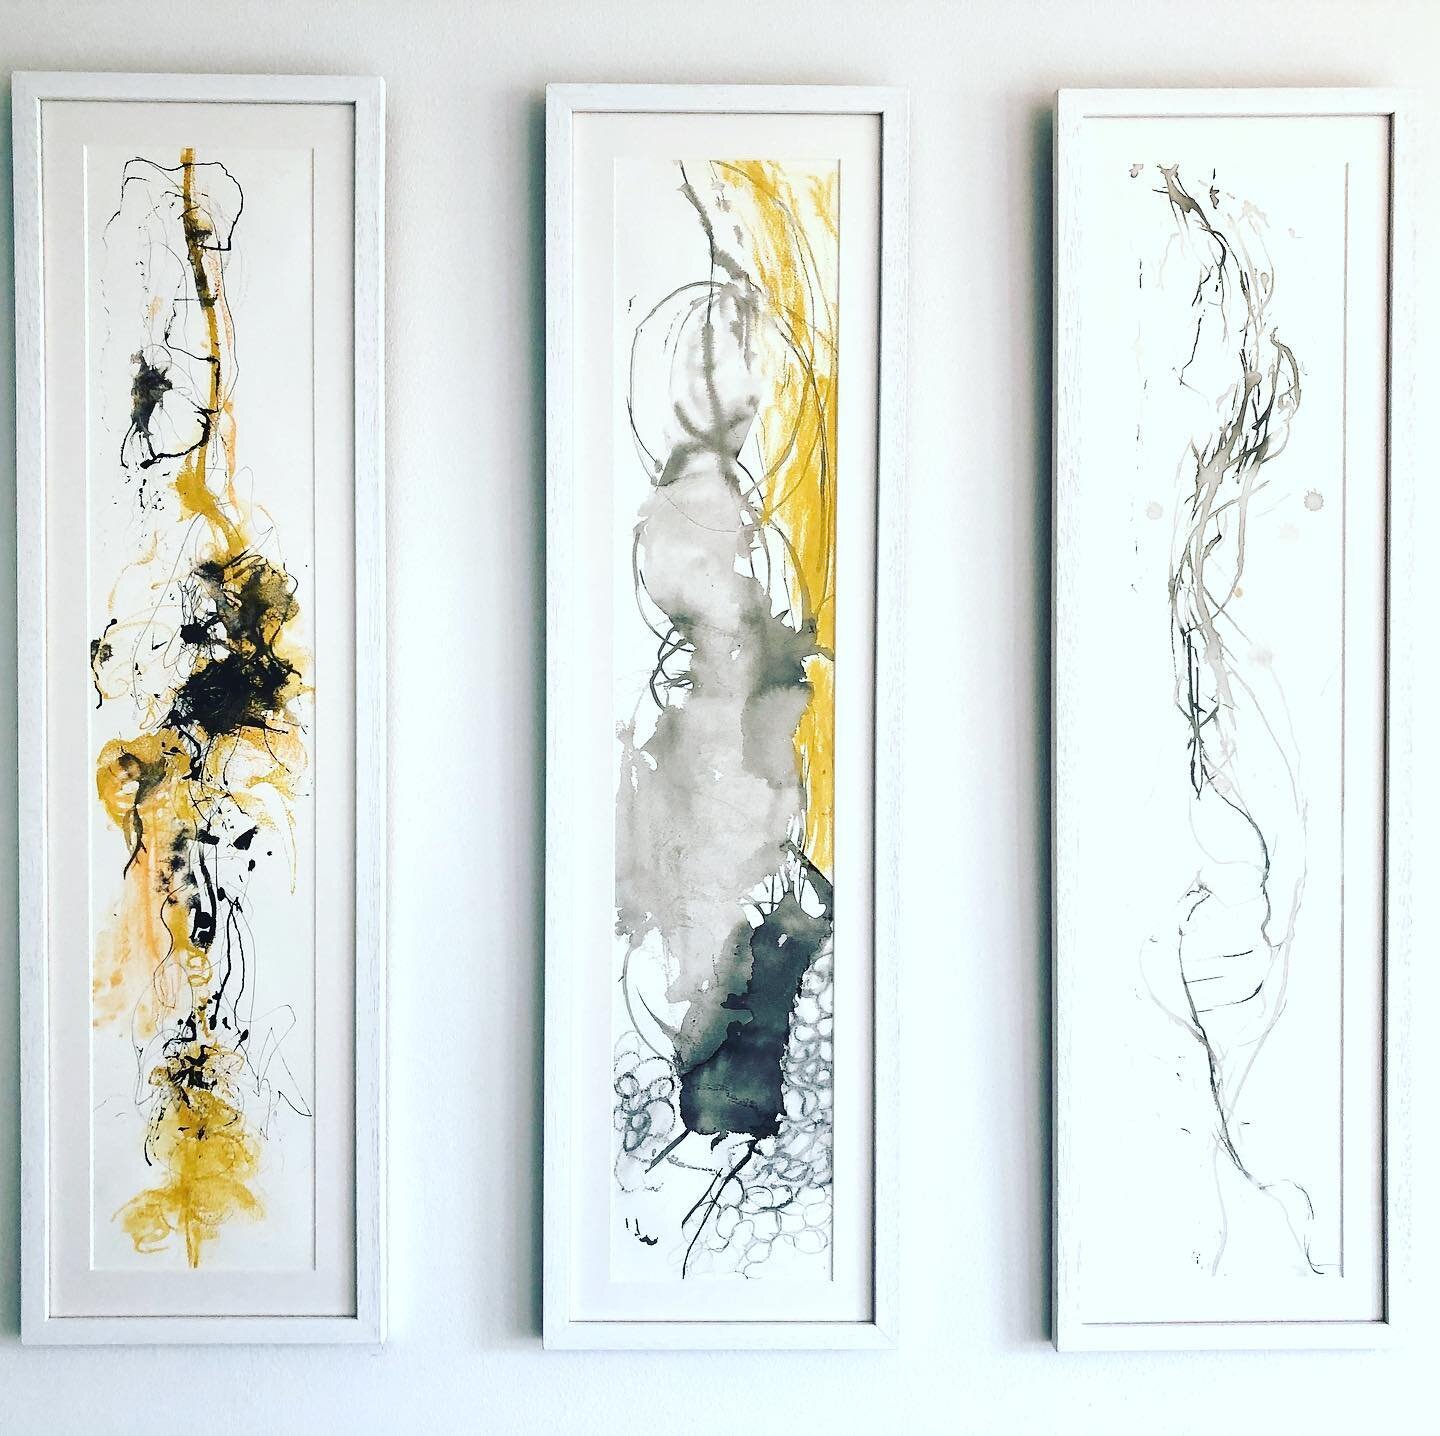 Mixed media drawings - ink, graphite, chalk and pastel. I&rsquo;m very much enjoying working on long sheets of paper and in a series. Exploring presence, spontaneity and touch...
.
.
.
#drawinginlockdown #drawinginlondon #mindfulness #mindfuldrawing 